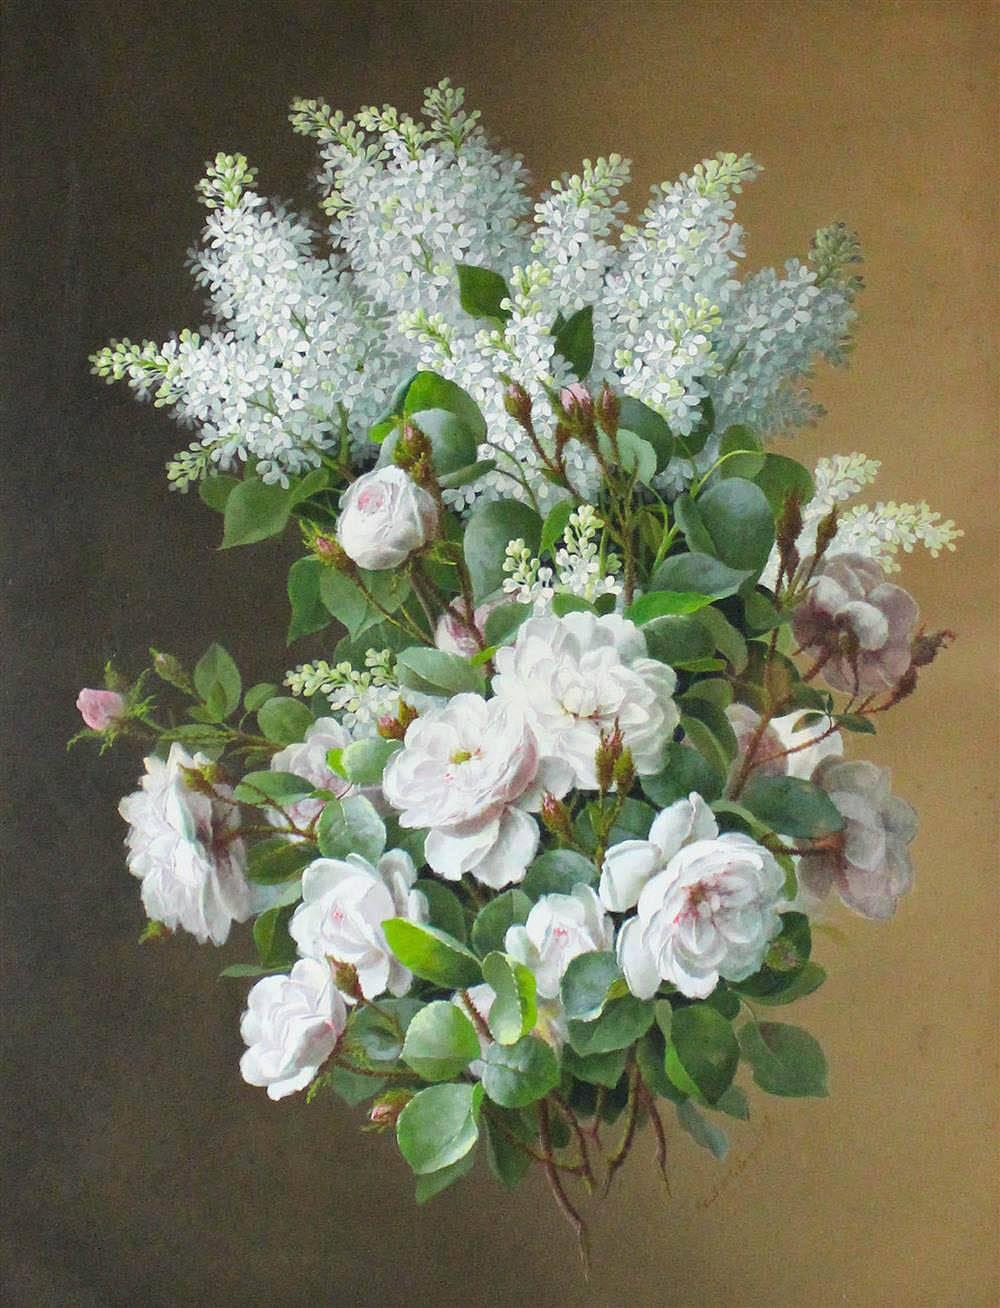 Raul Maucherat de Longpré (French, 1843-1911).

Bouquet of lilacs and bouquet of lilacs and roses.

Watercolor and gouache on paper, signed lower right.

Sight size: 24.5” x 19.5”.
Frame size: 39.25” x 34.25”. 

De Longpré was born to a